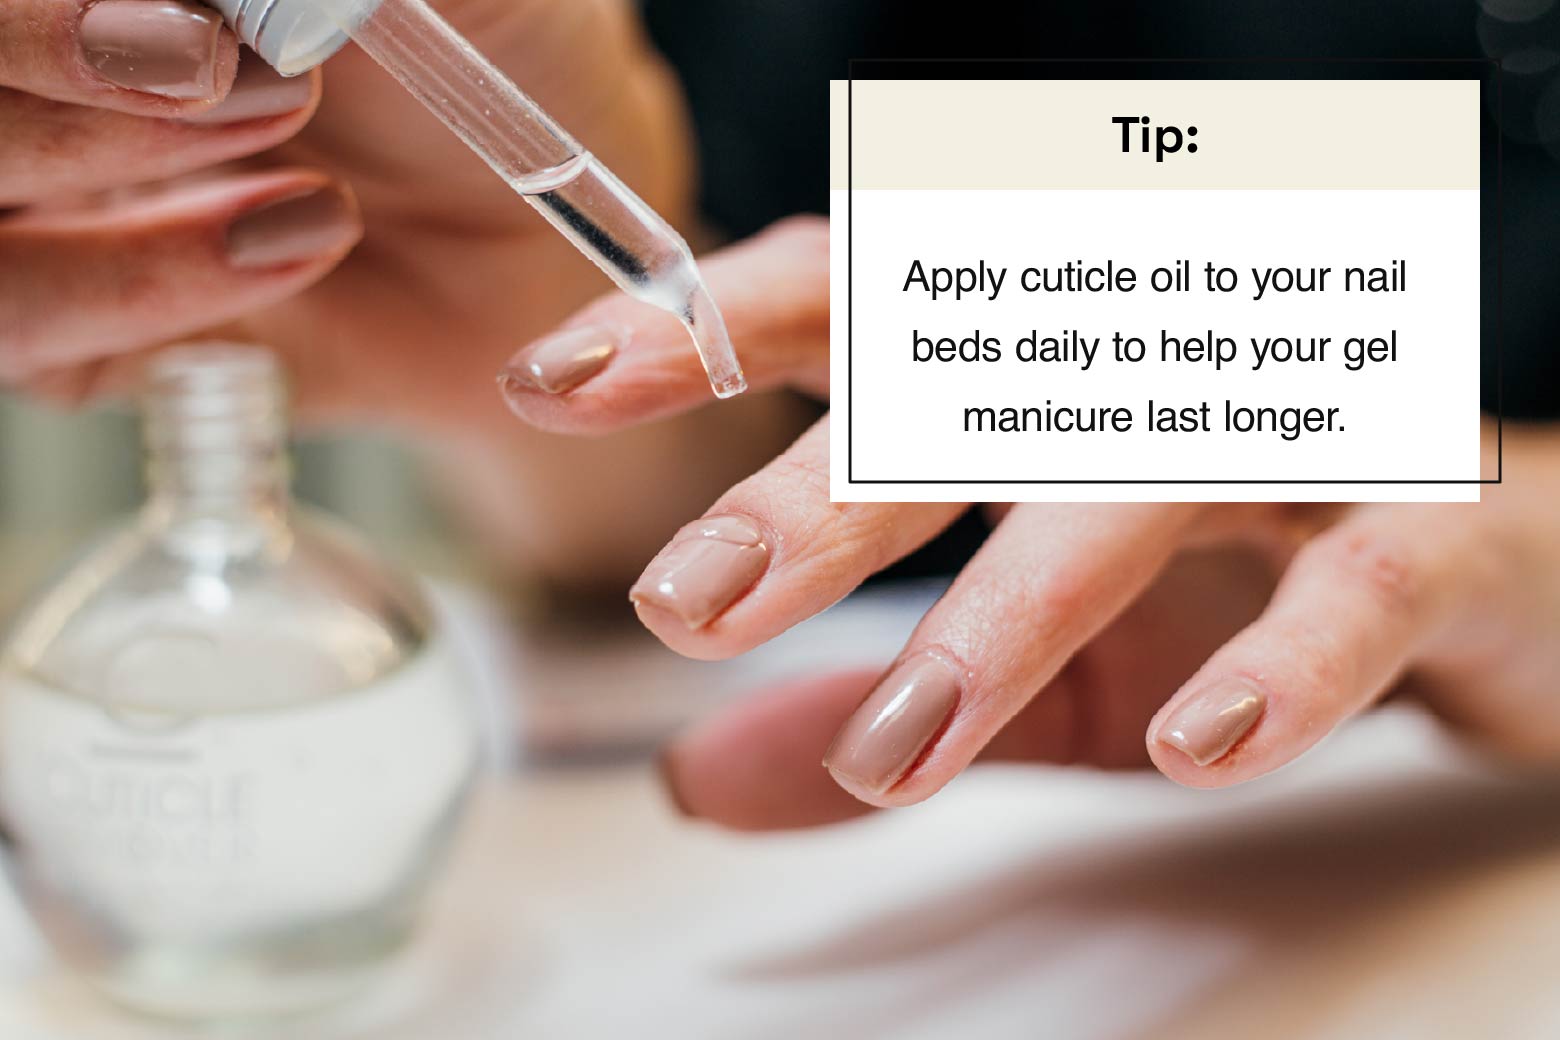 close-up of person applying cuticle oil to nails with text box in the upper-right hand corner saying “Tip: Apply cuticle oil to your nail beds daily to help your gel manicure last longer.”